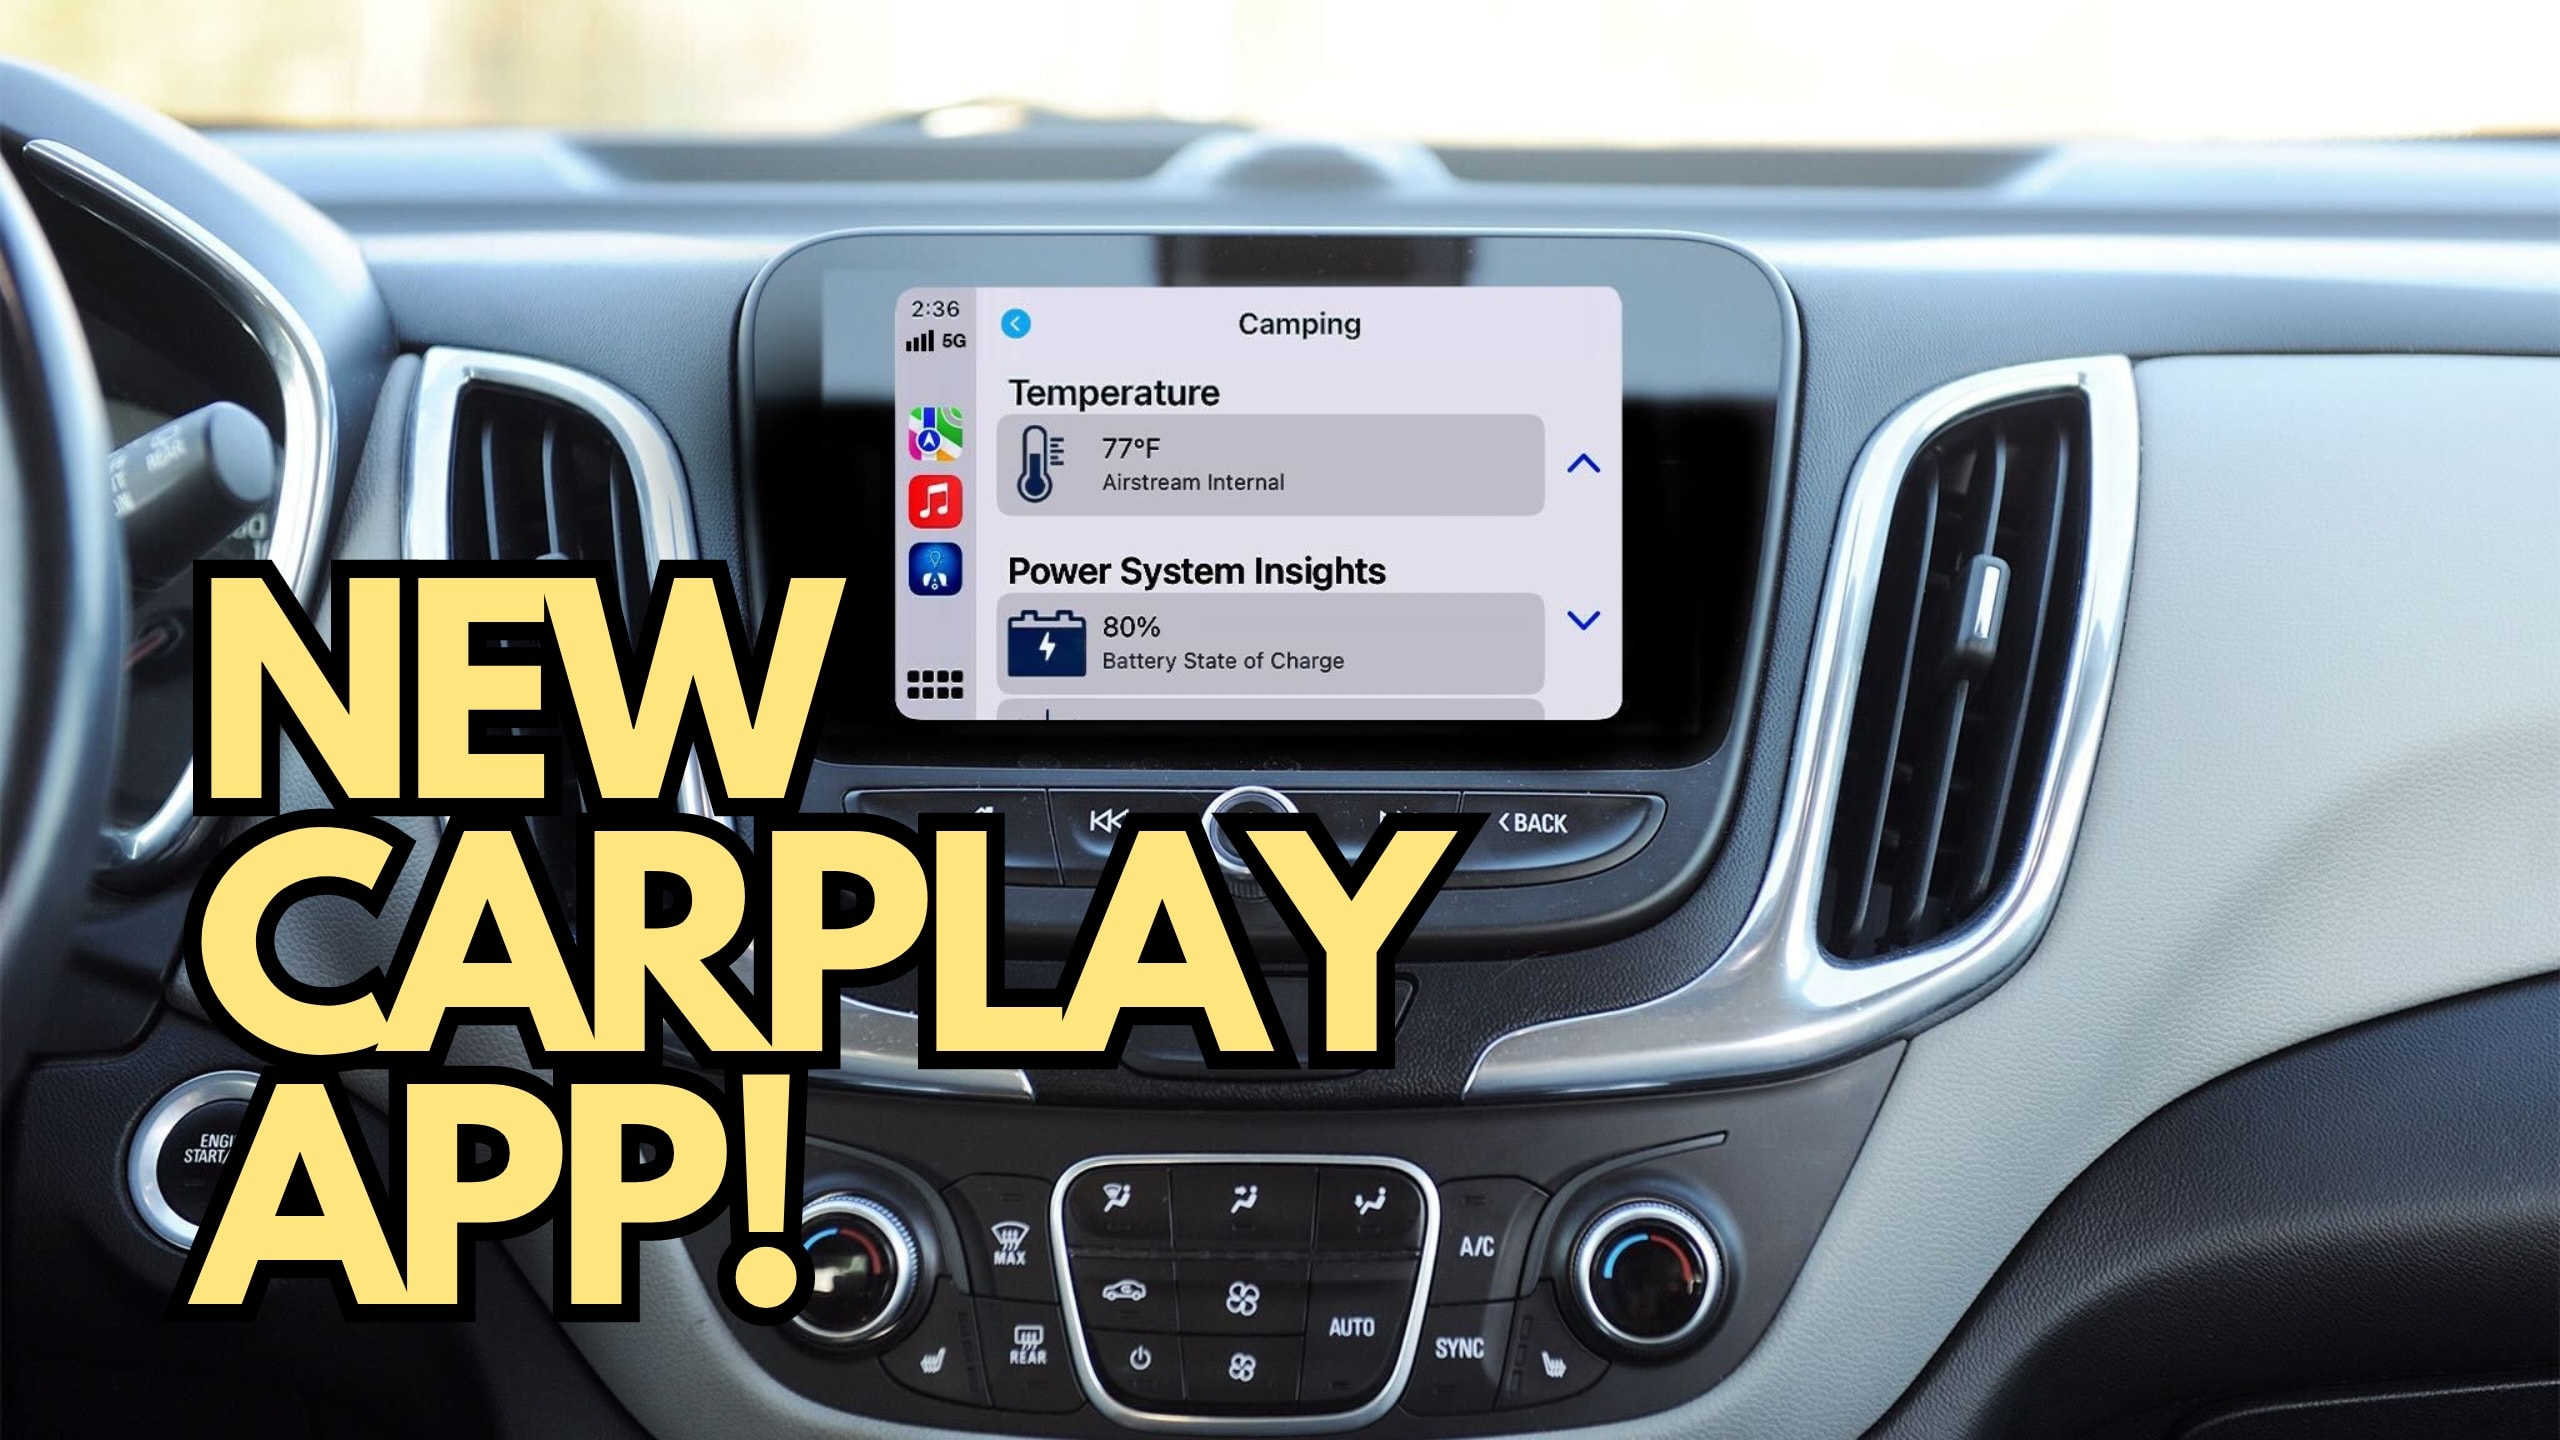 One More App Launches on CarPlay to Pioneer New Features, Beat This,  Android Auto - autoevolution